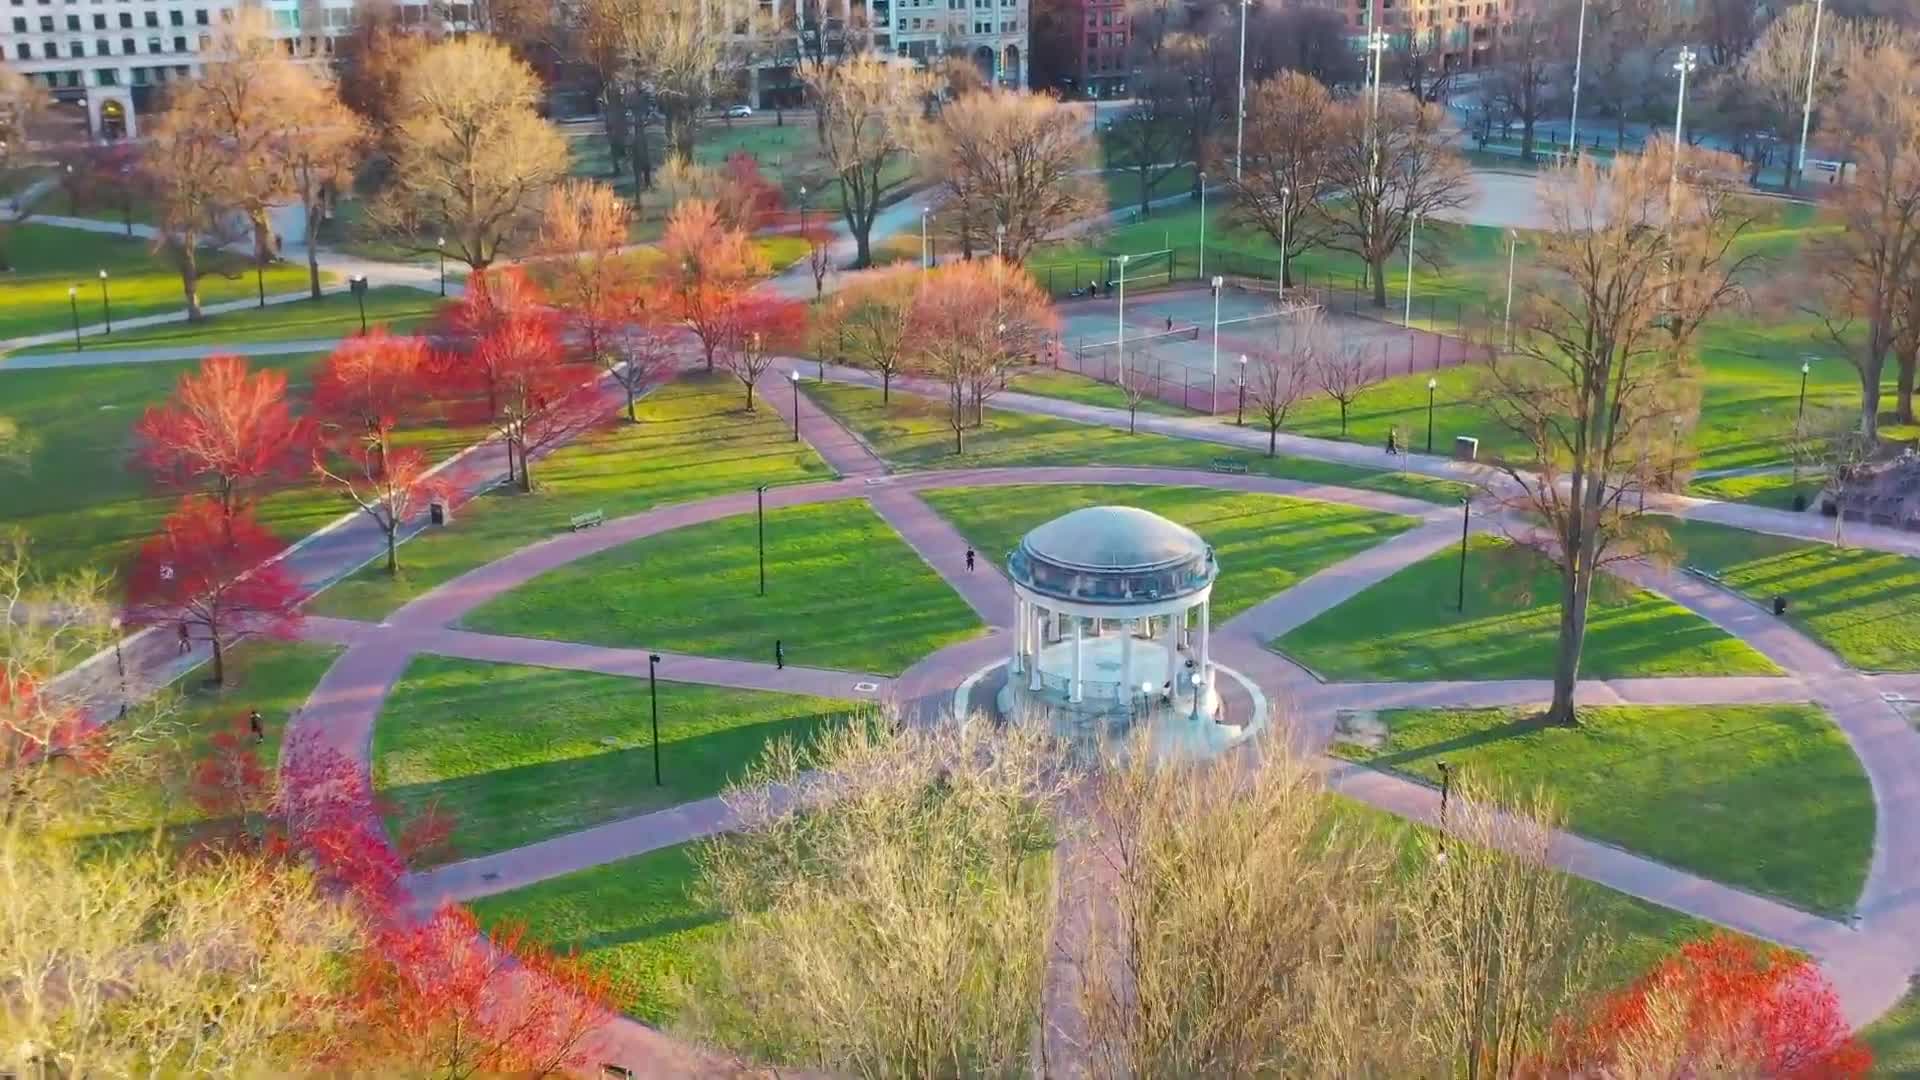 A dog park, a redesigned Frog Pond pavilion, and other proposals inside the Boston Common master plan